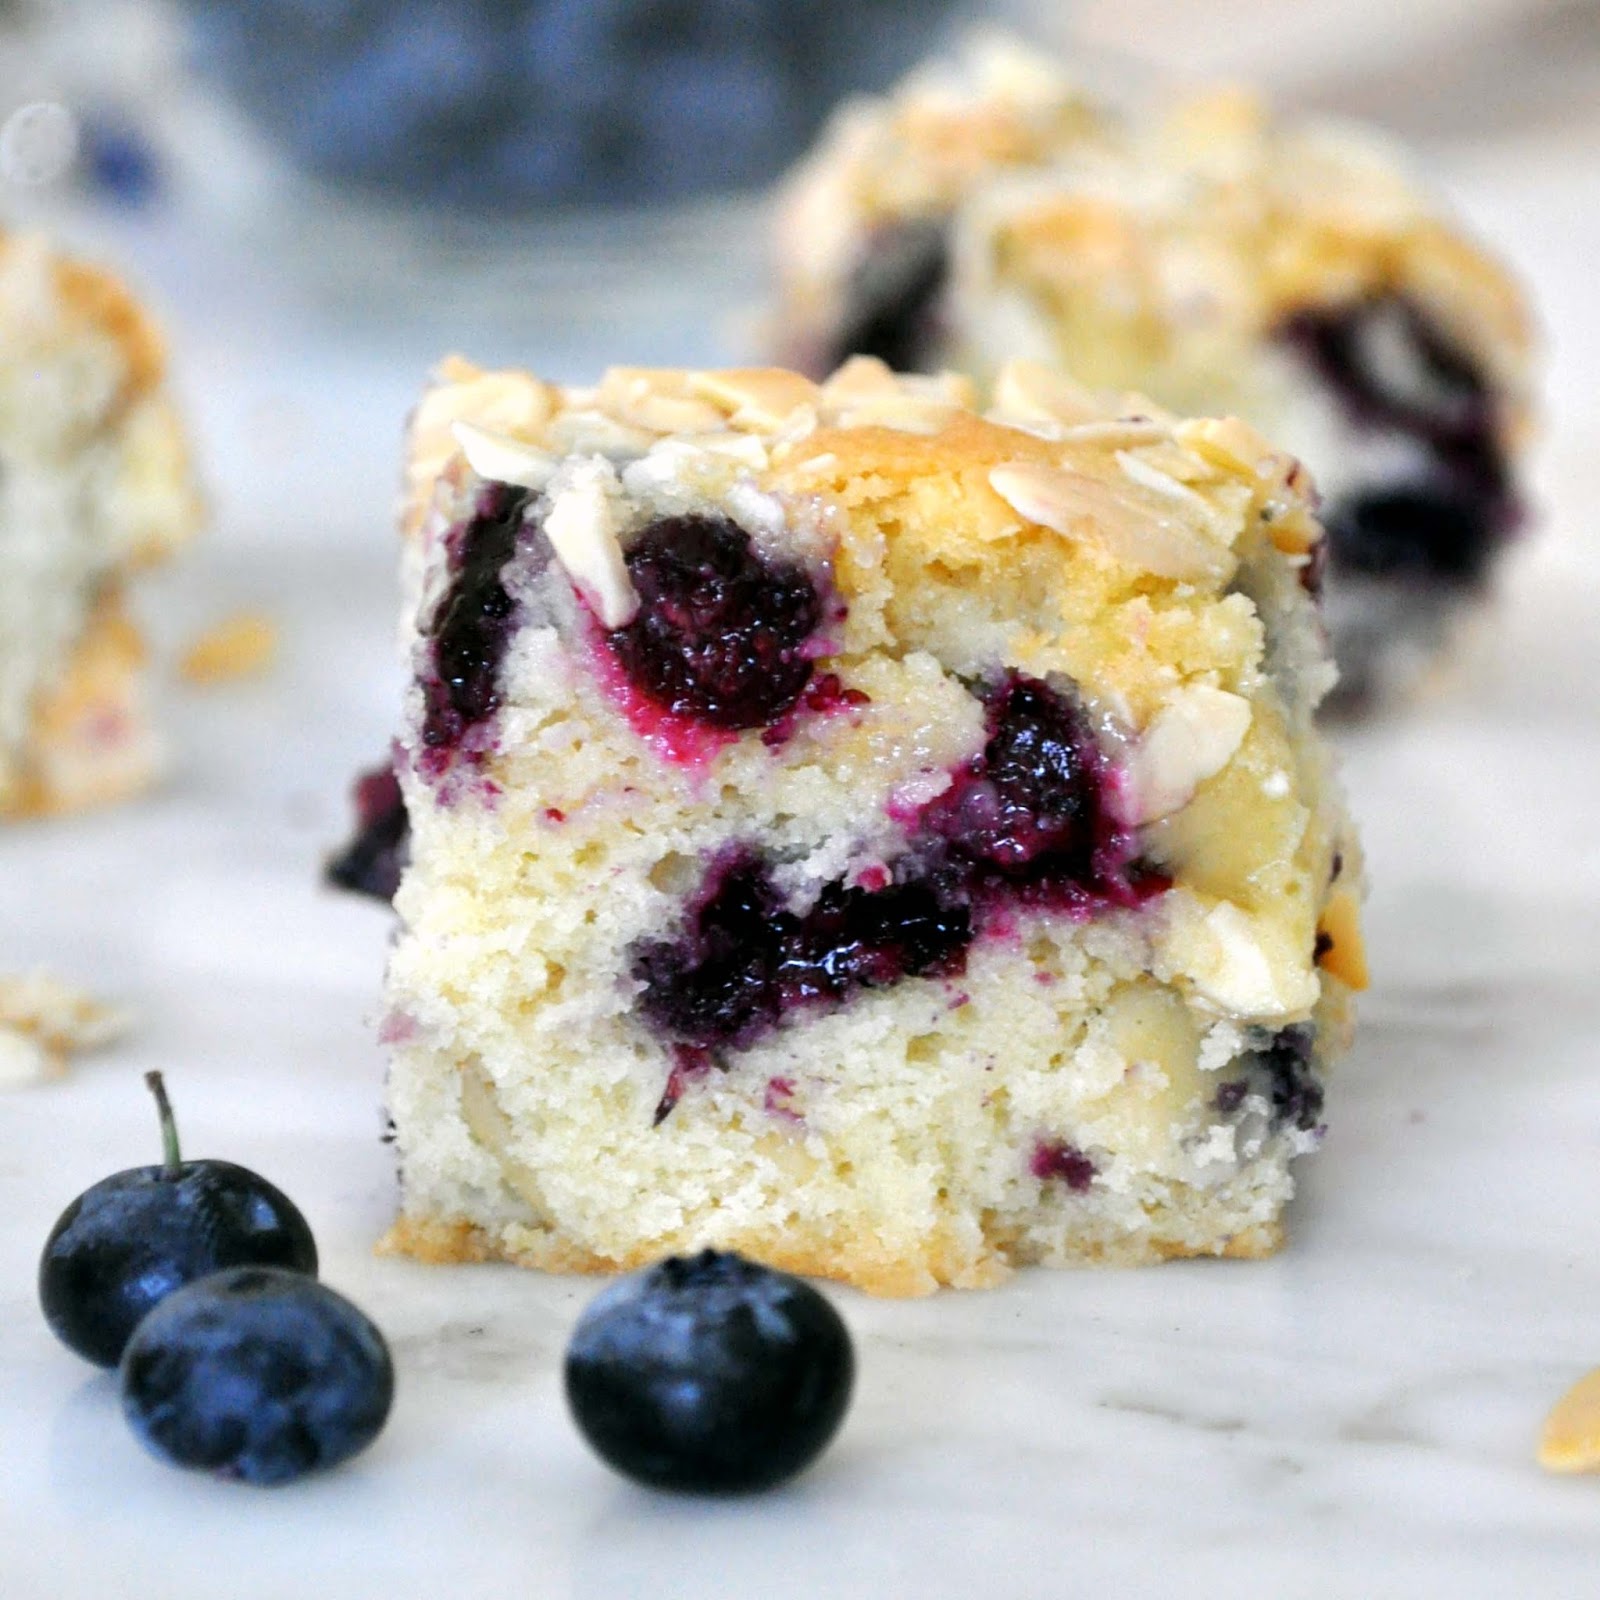 Cooking with Manuela: Blueberry-Almond Coffee Cake Recipe